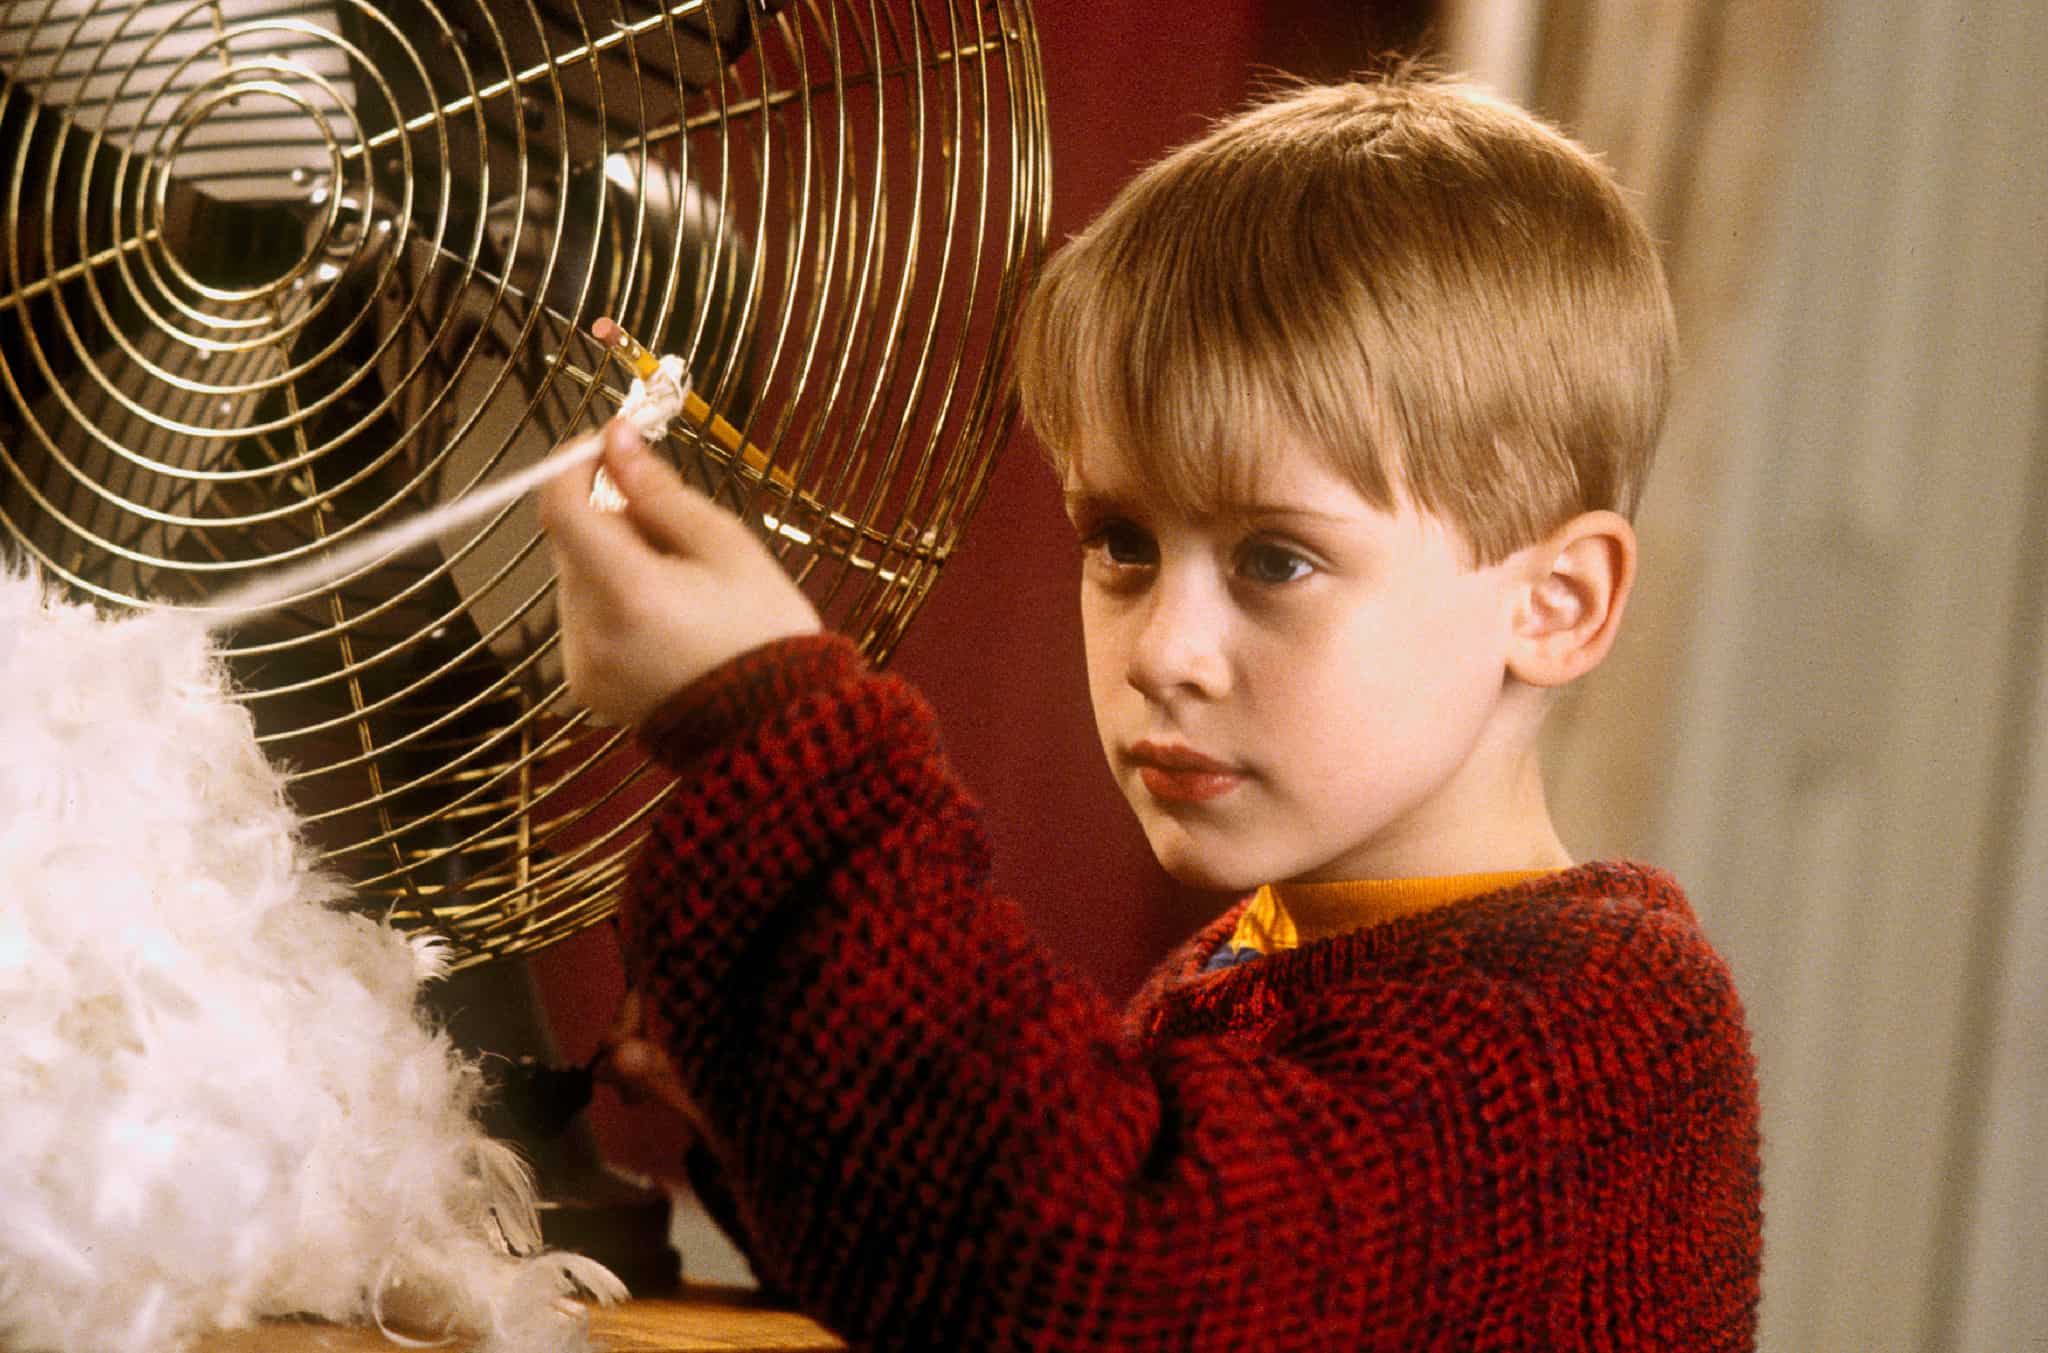 A young boy setting up a boobie trap in this image from Twentieth Century Fox.